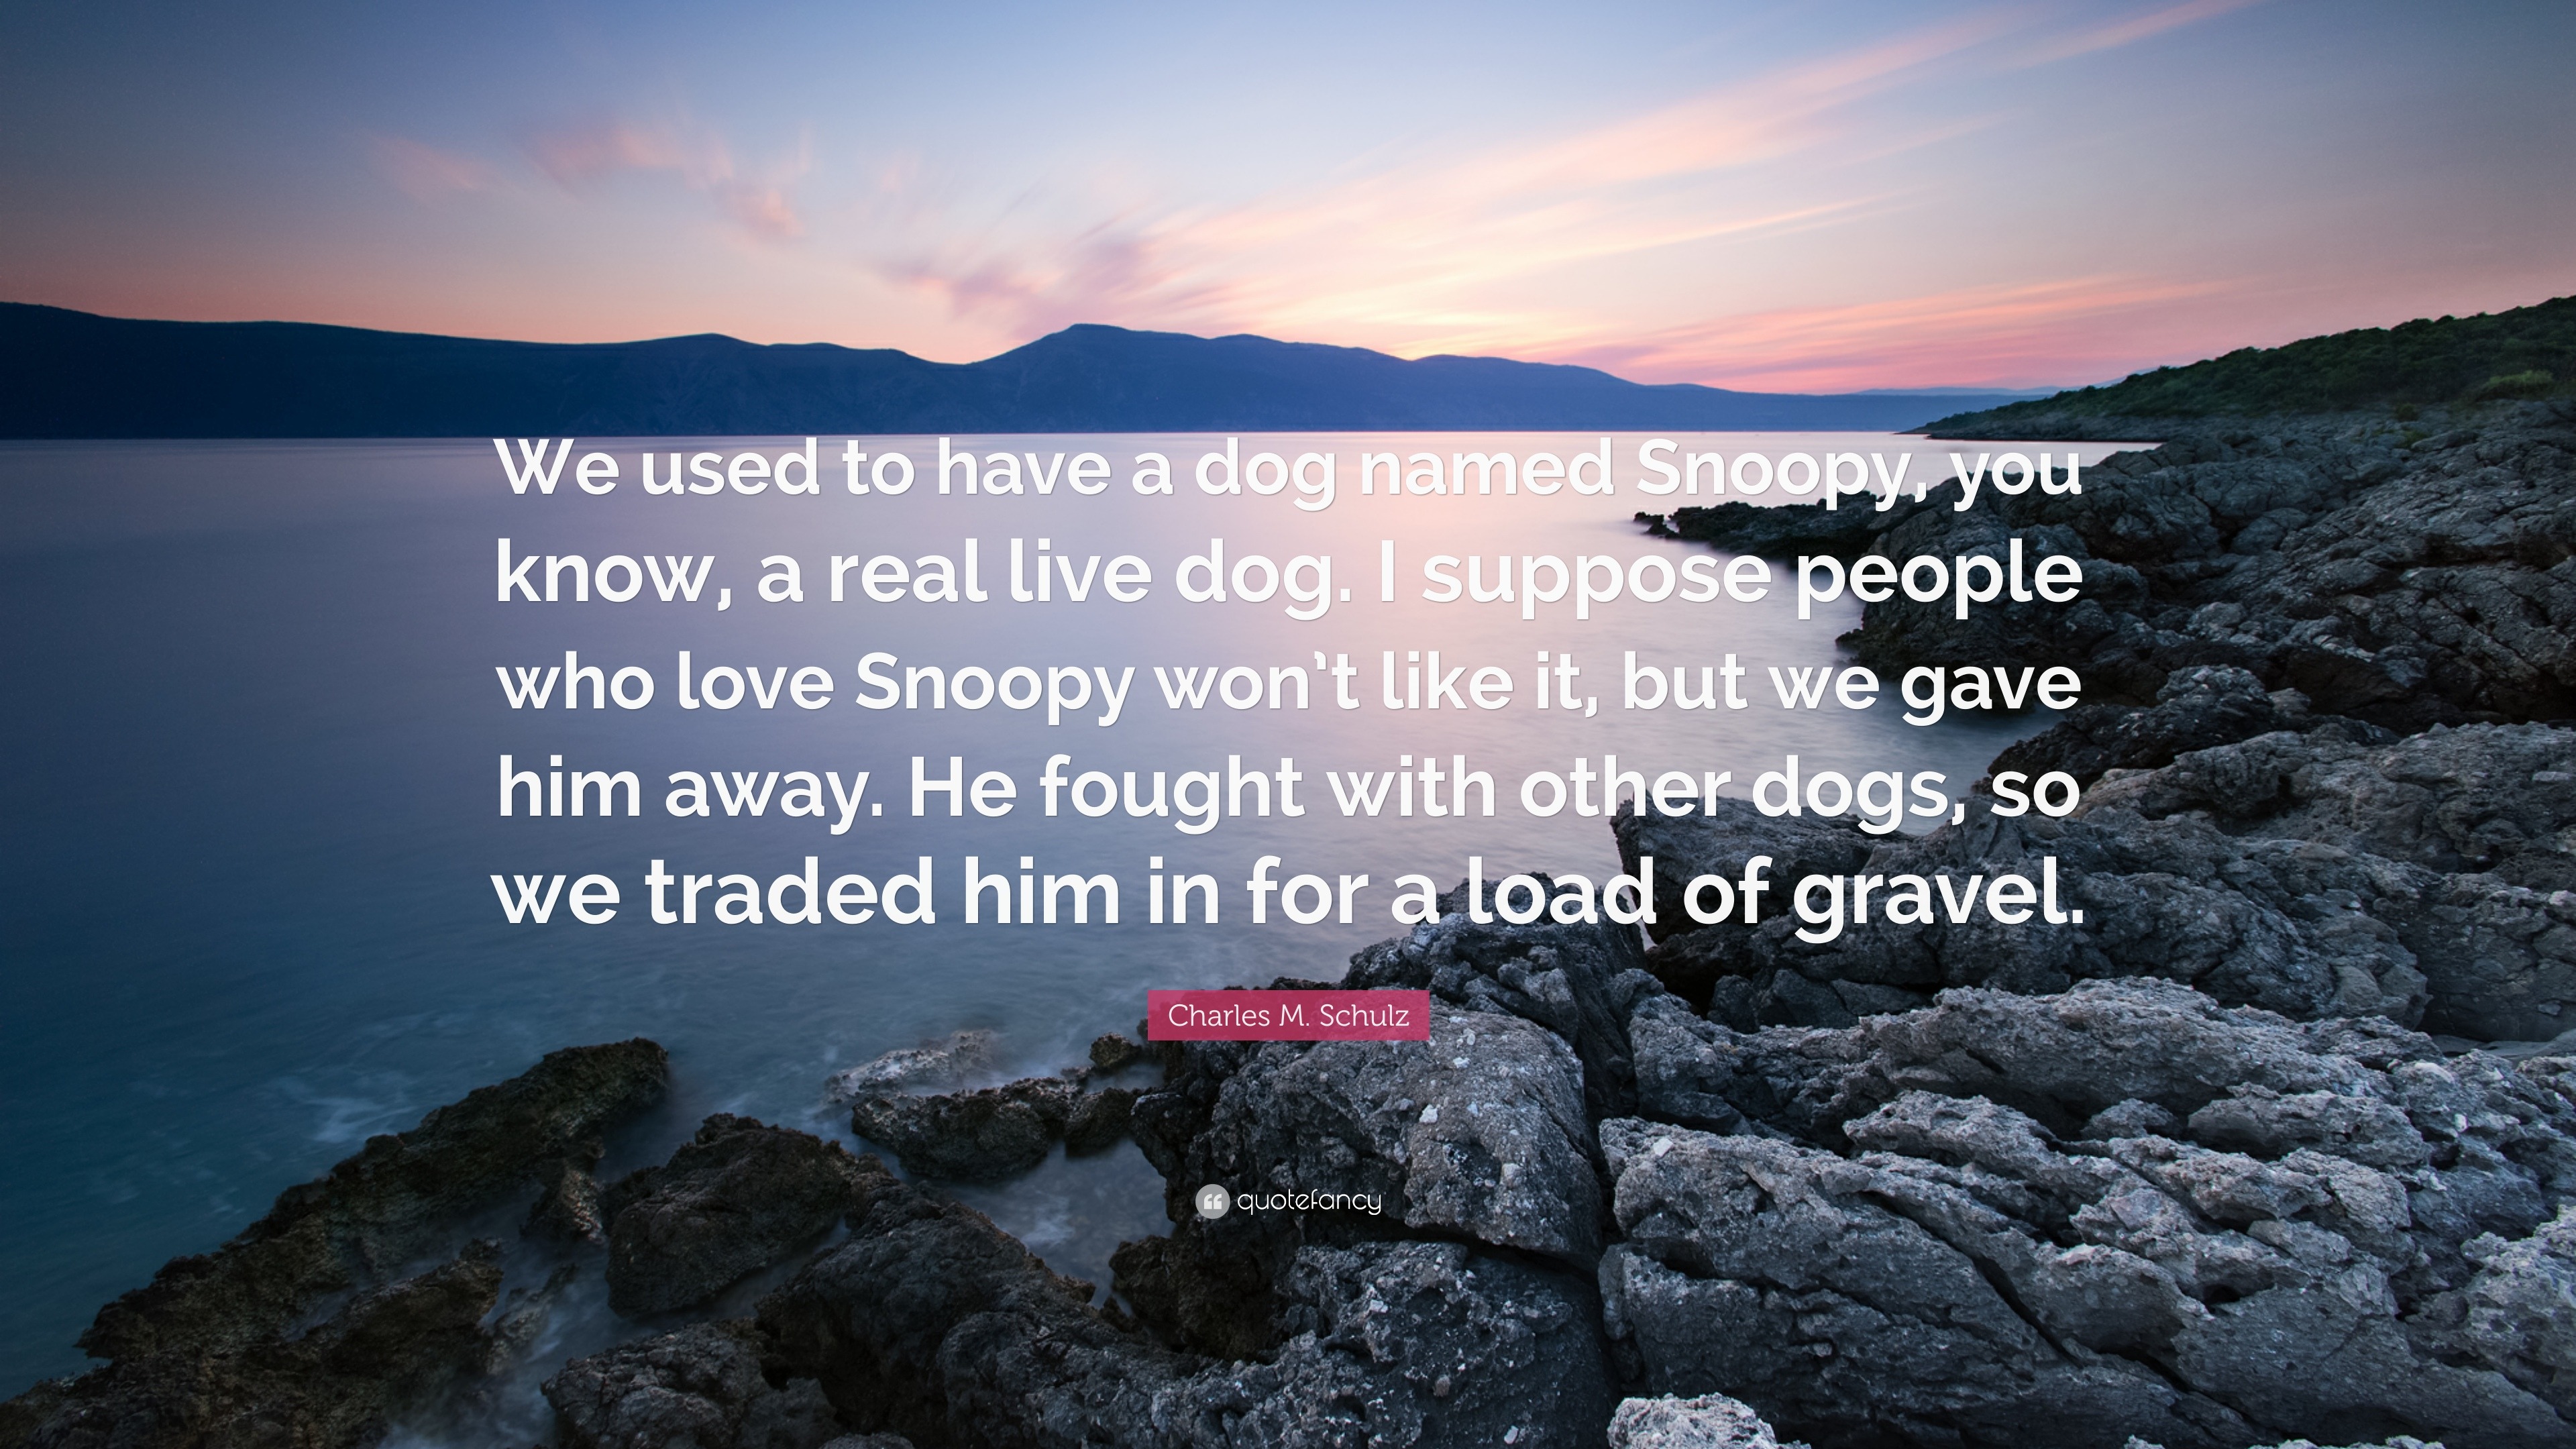 Charles M Schulz Quote “We used to have a dog named Snoopy